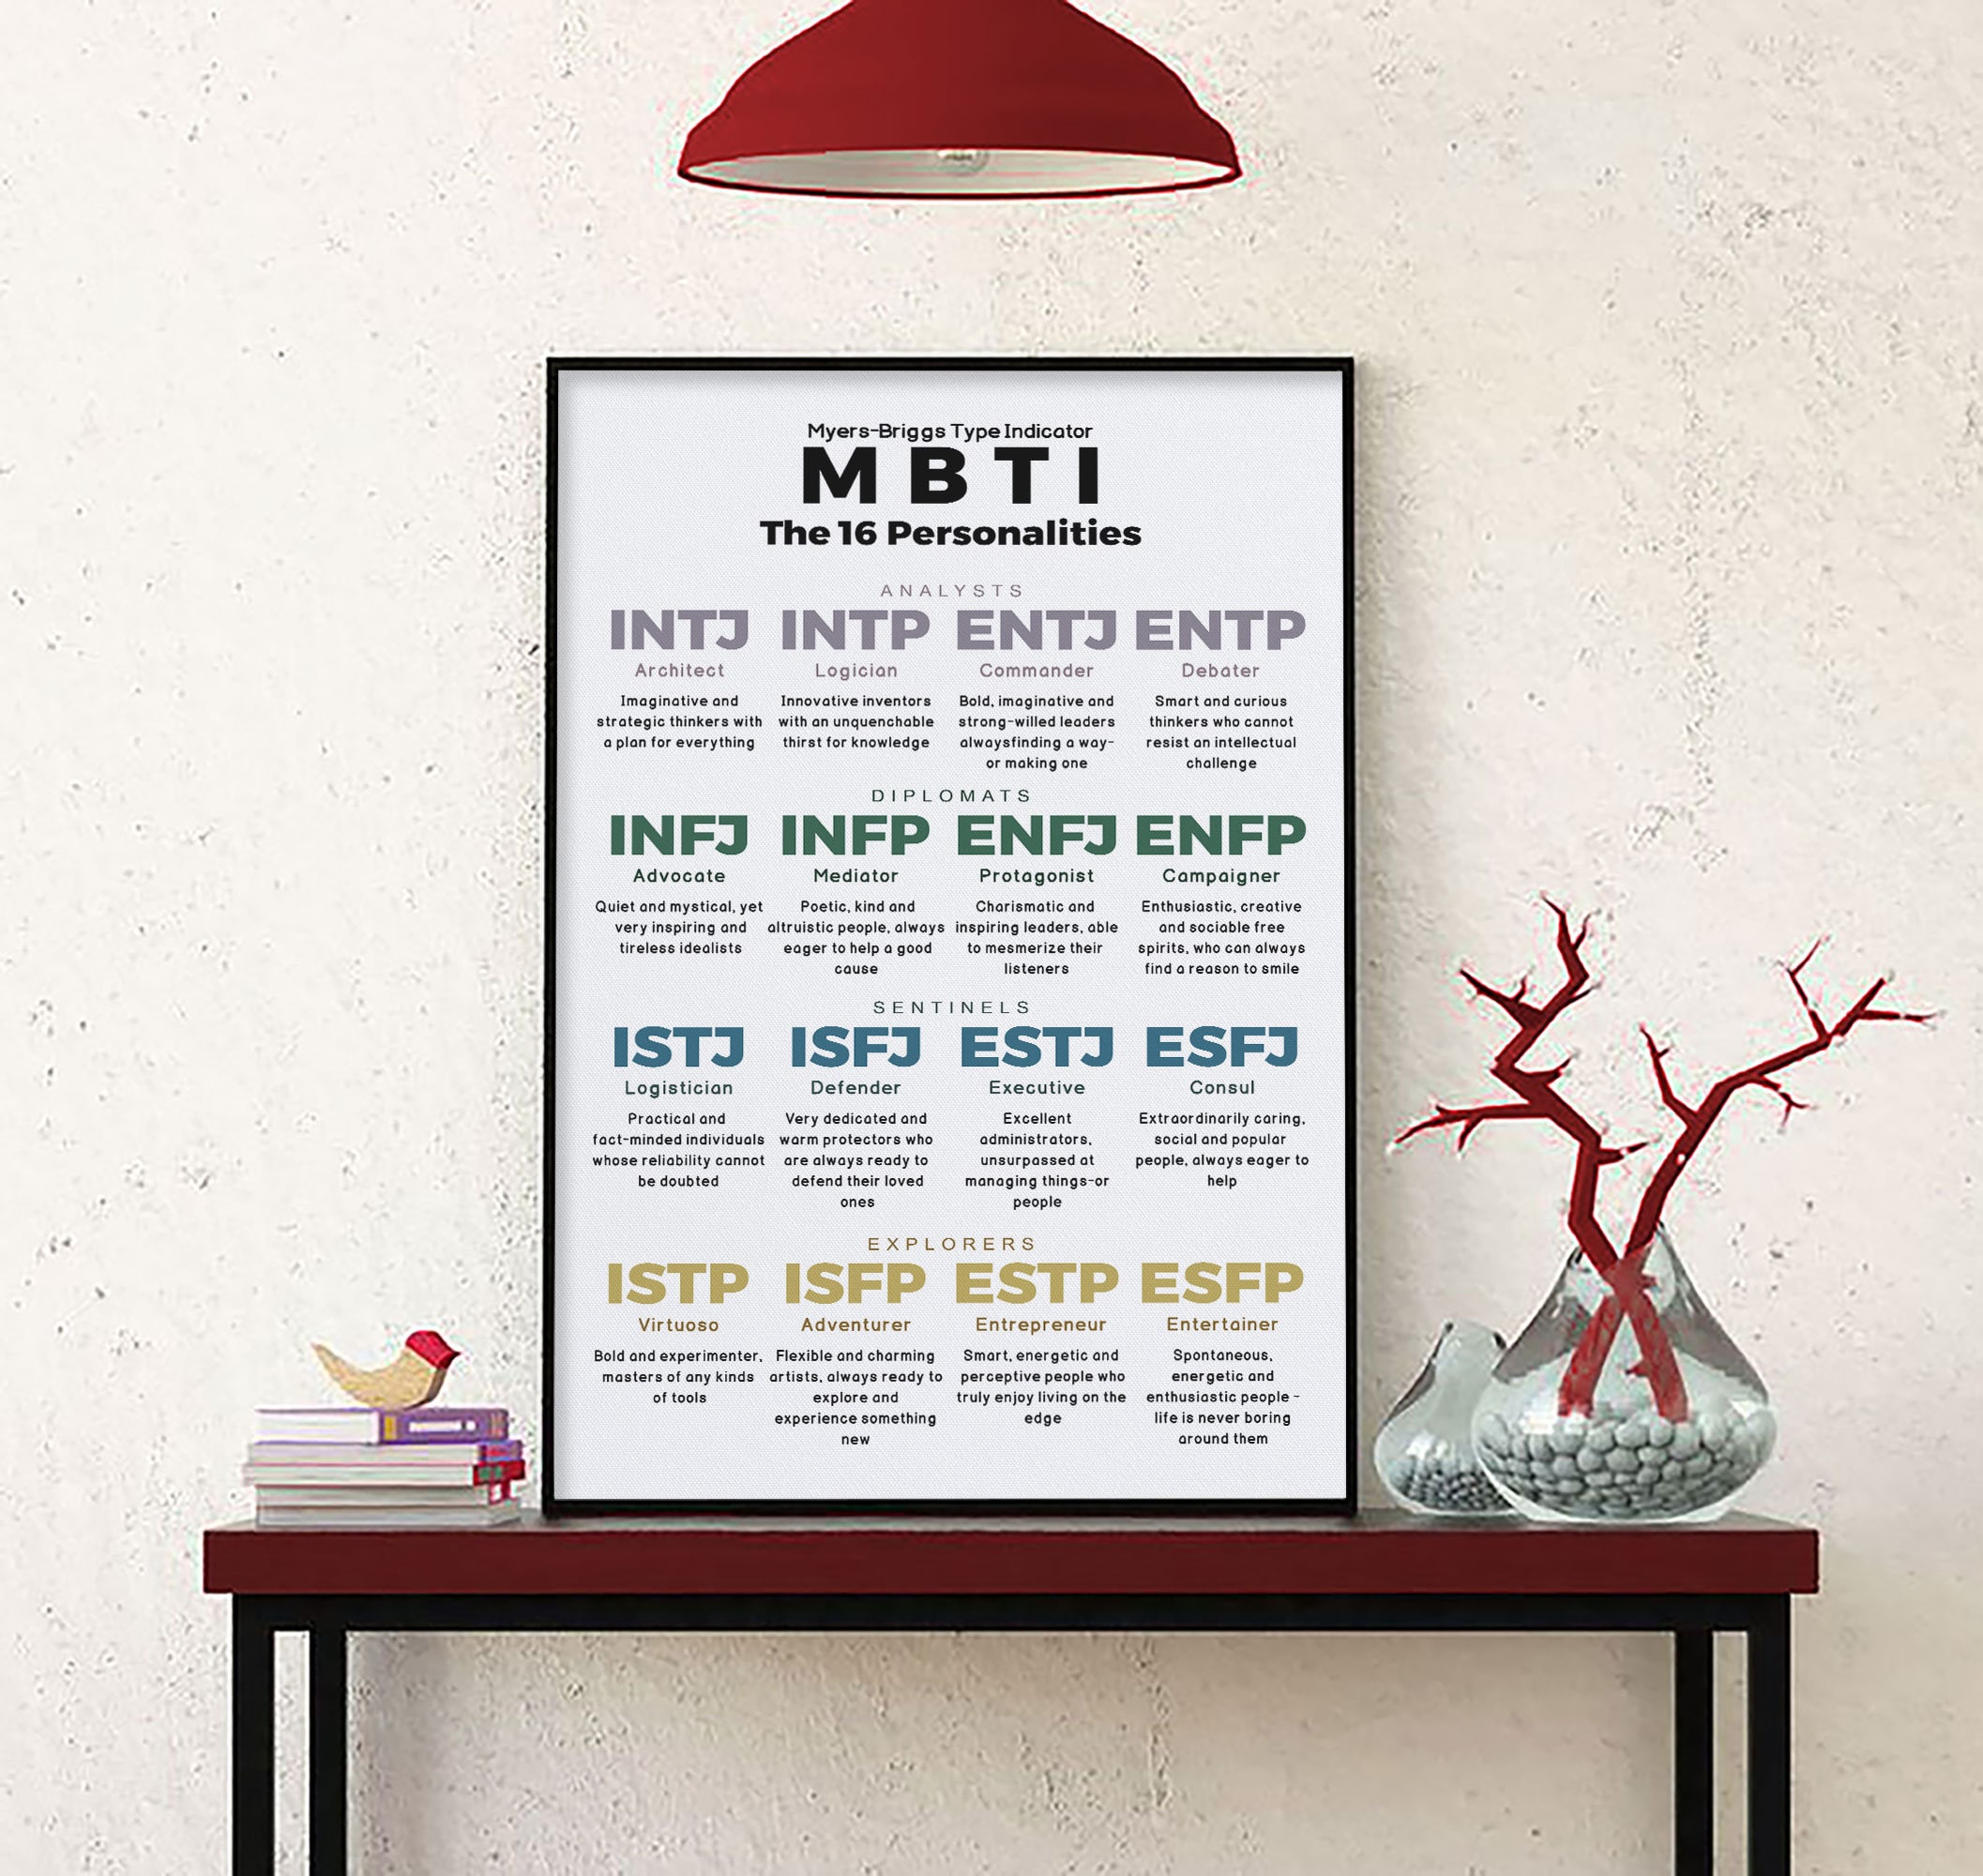 Holy Joo MBTI Personality Type: ENFP or ENFJ?